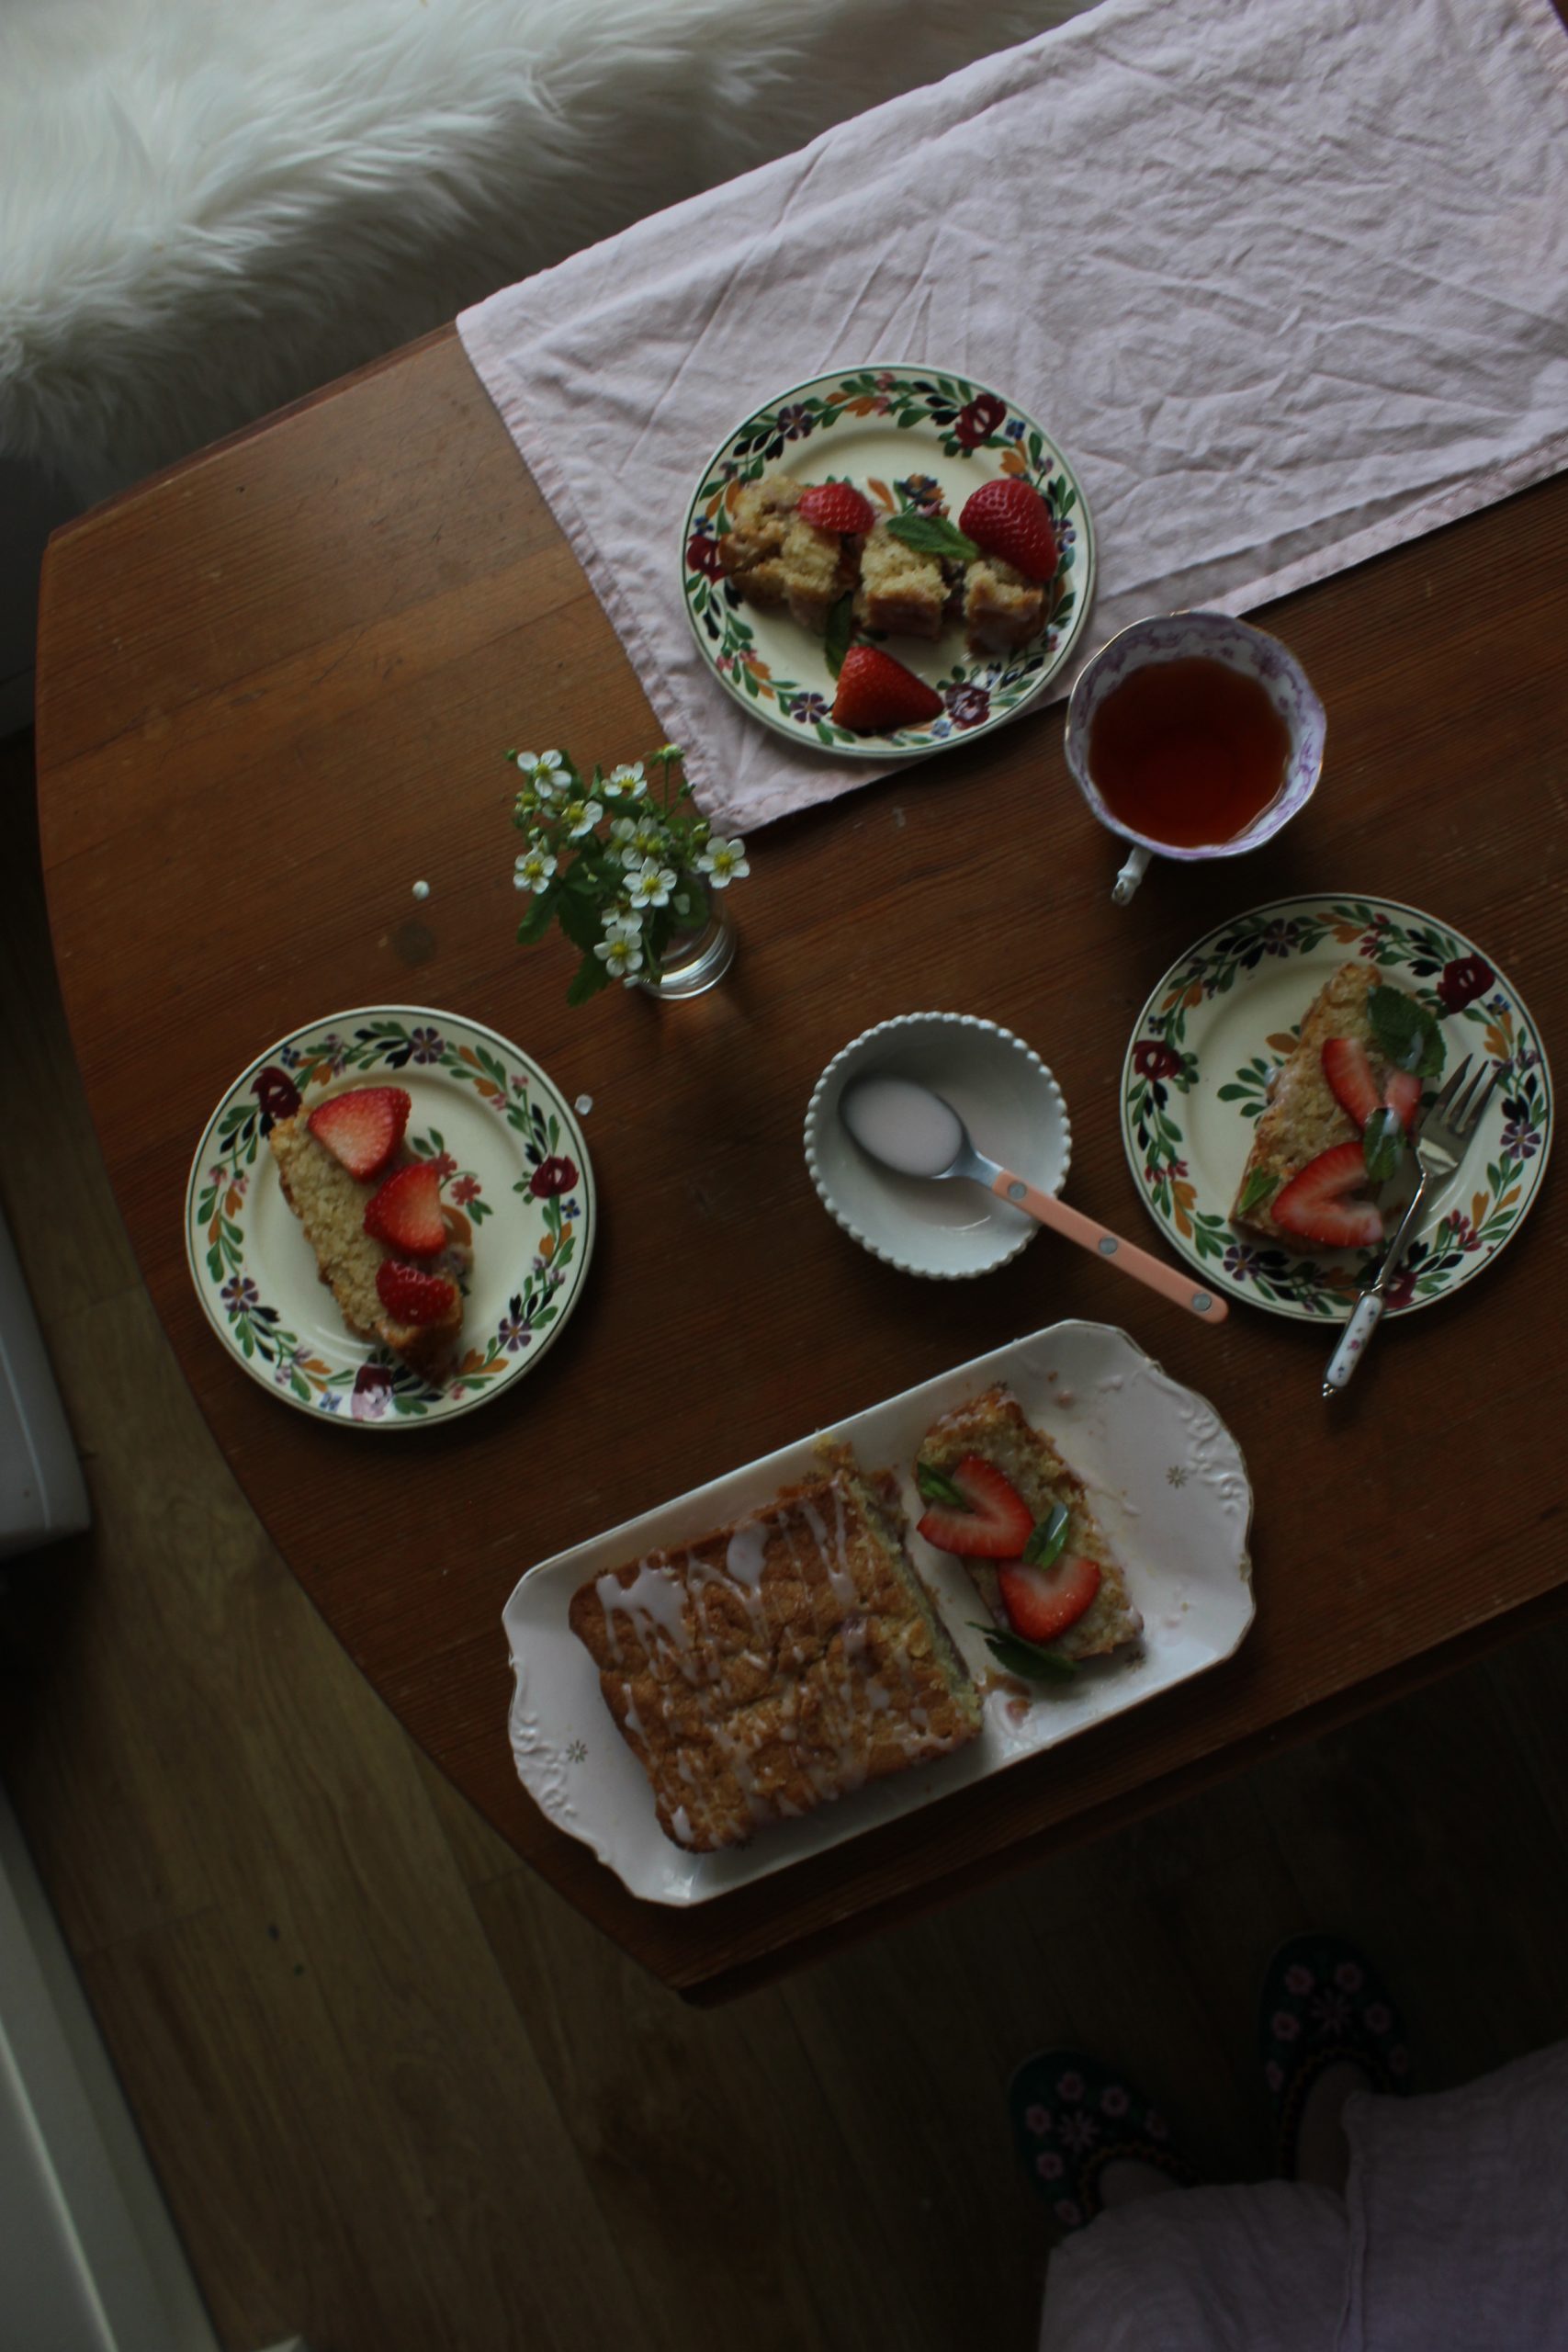 Strawberry and Mint Loaf Cake